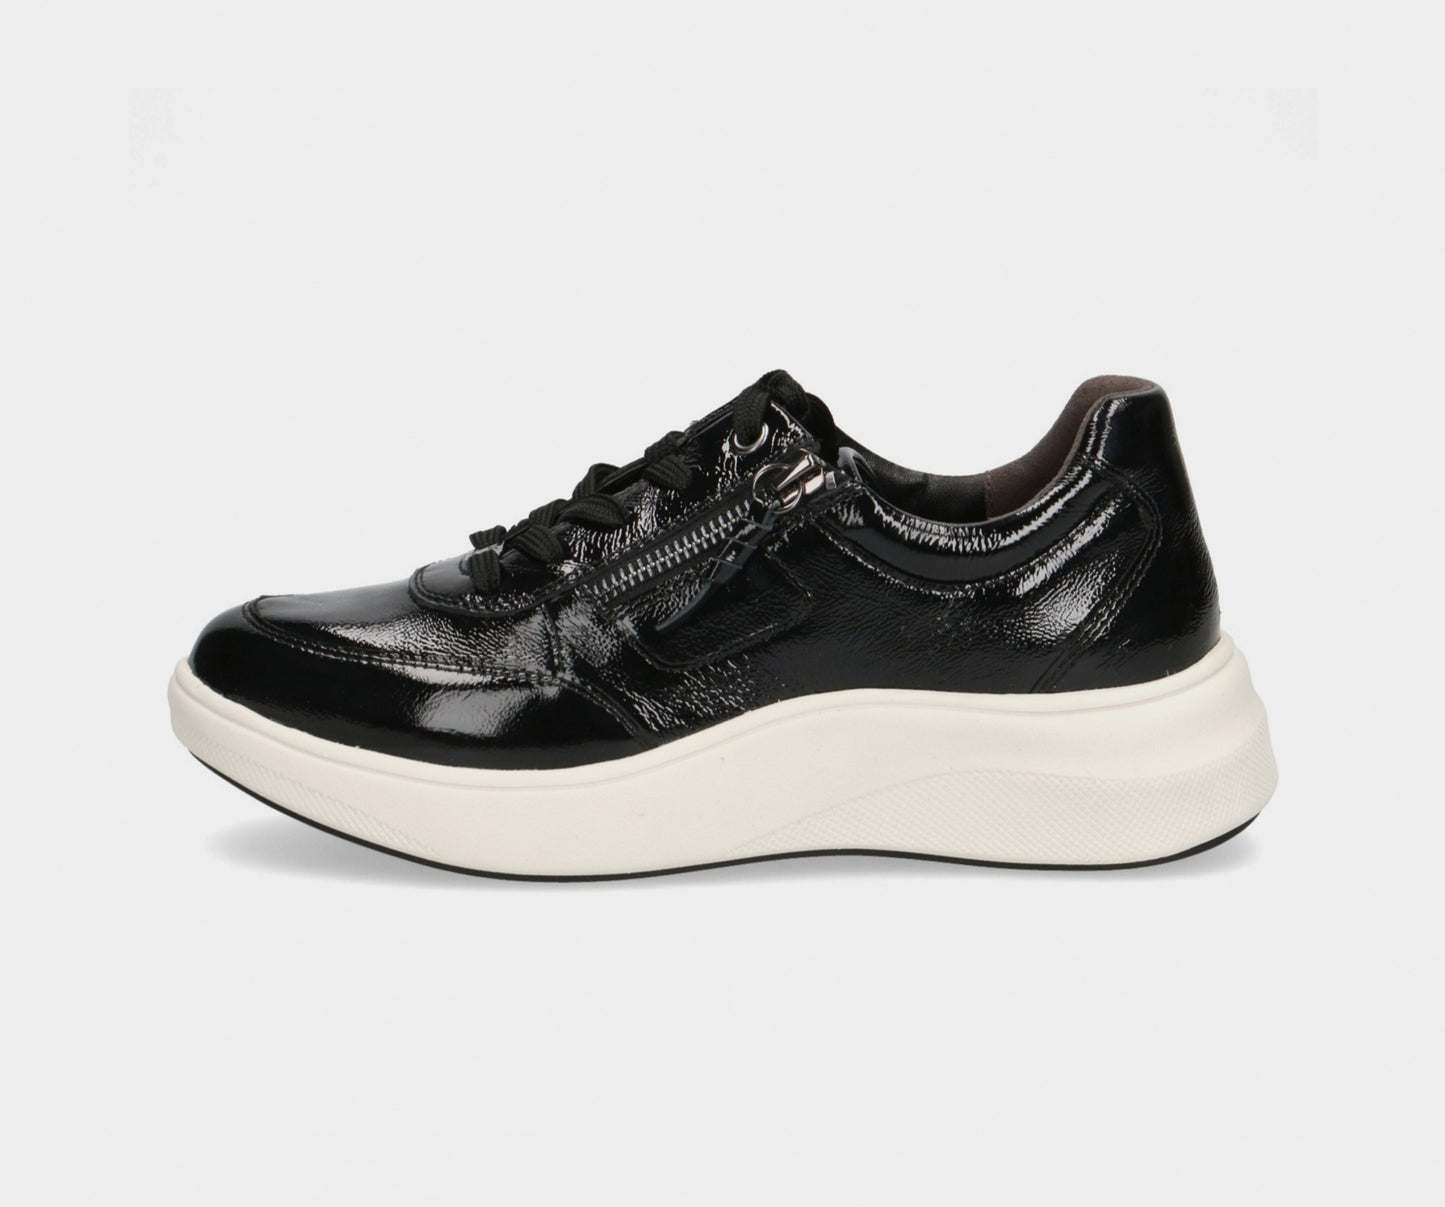 Caprice Patent Black leather Lace up side zip trainer Only size 3.5 and 5 left